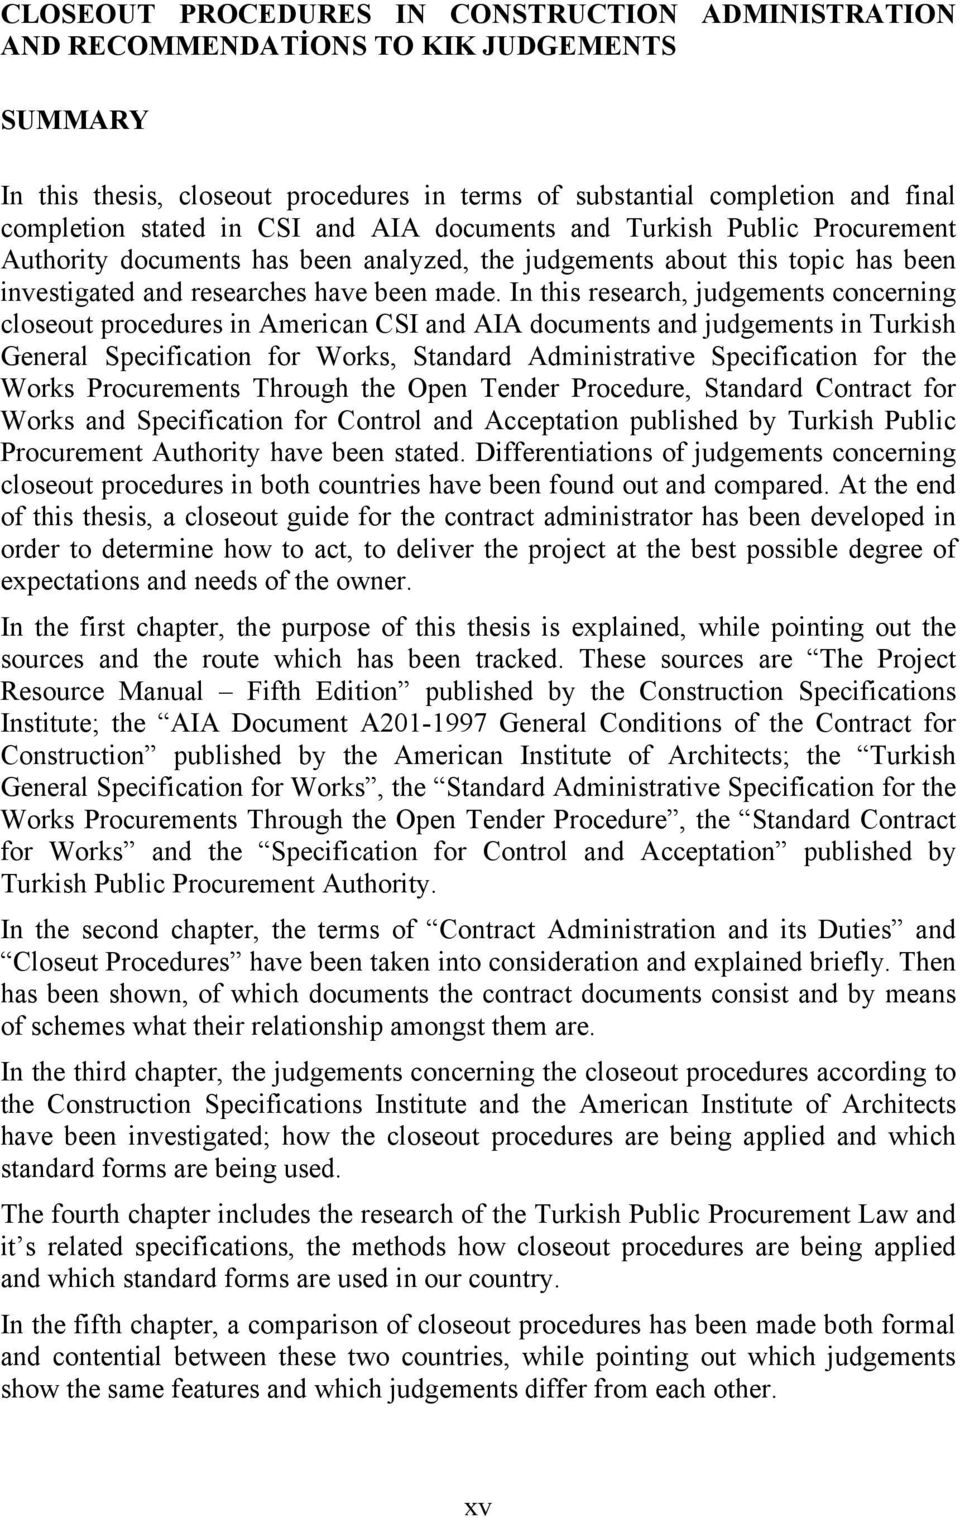 In this research, judgements concerning closeout procedures in American CSI and AIA documents and judgements in Turkish General Specification for Works, Standard Administrative Specification for the